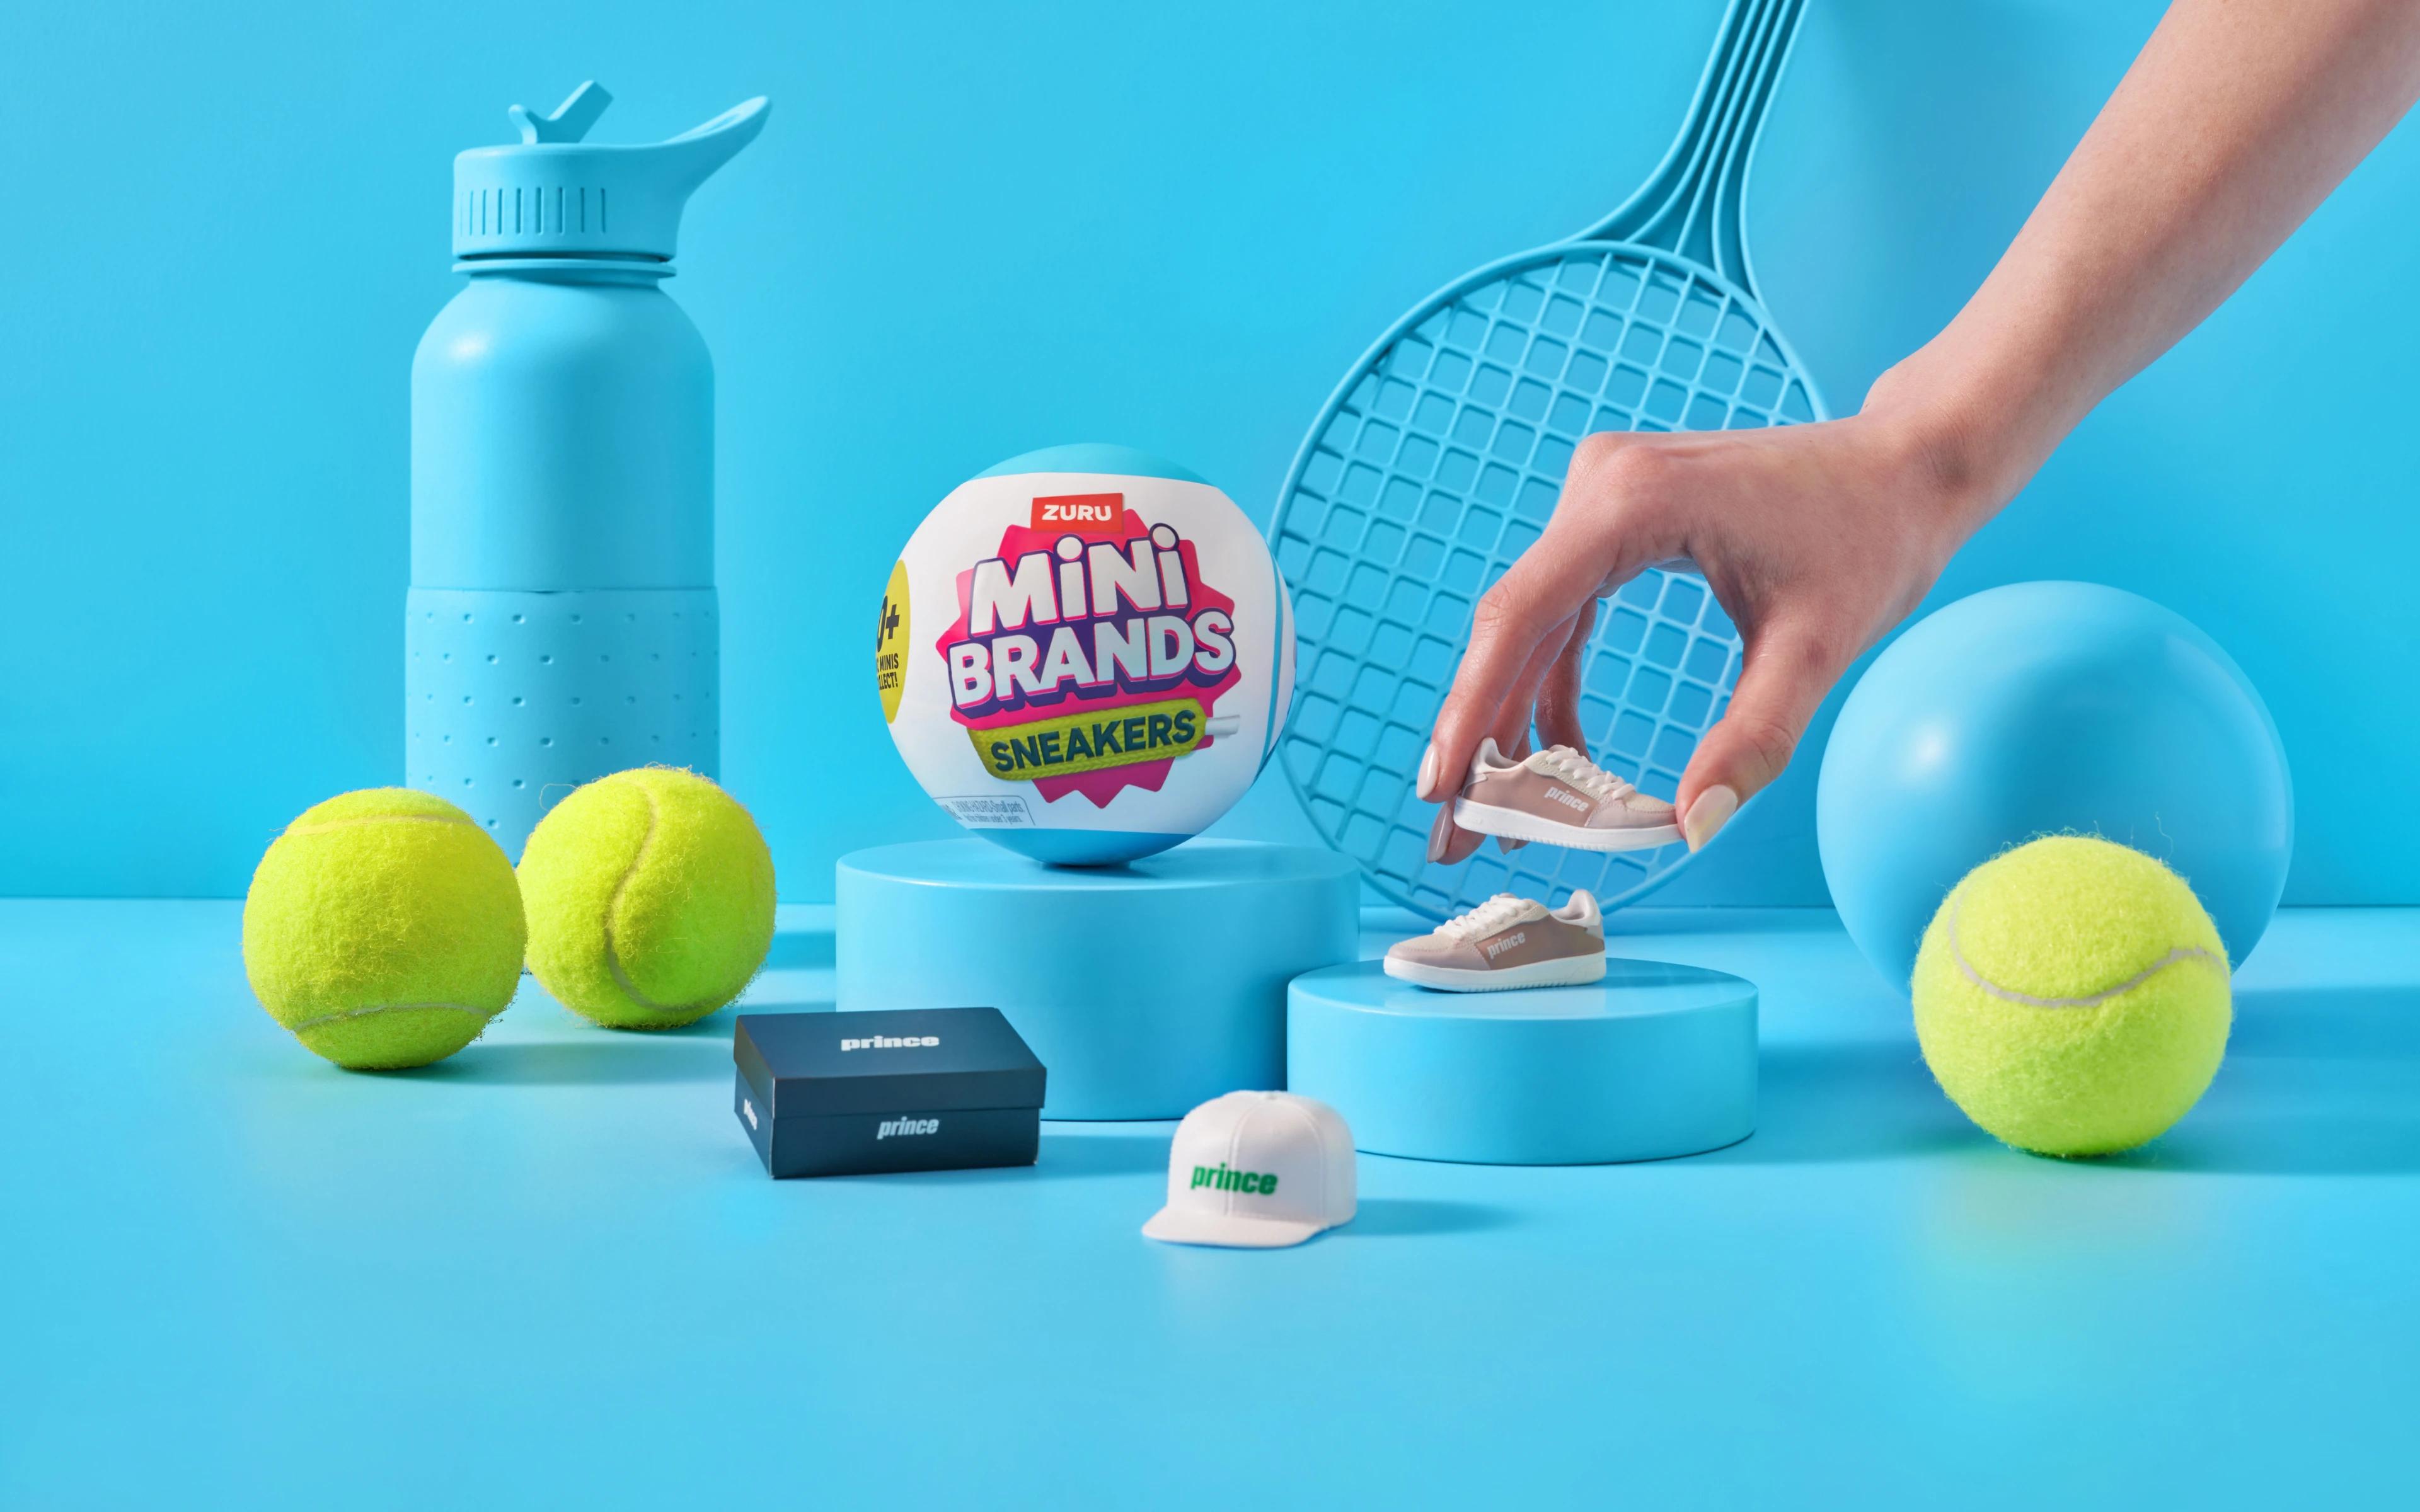 Interactive setup of ZURU Mini Brands Sneakers collection with a hand placing a miniature sneaker on a pedestal, surrounded by sports-themed items including tennis balls, a water bottle, a cap, and a racket on a blue background.